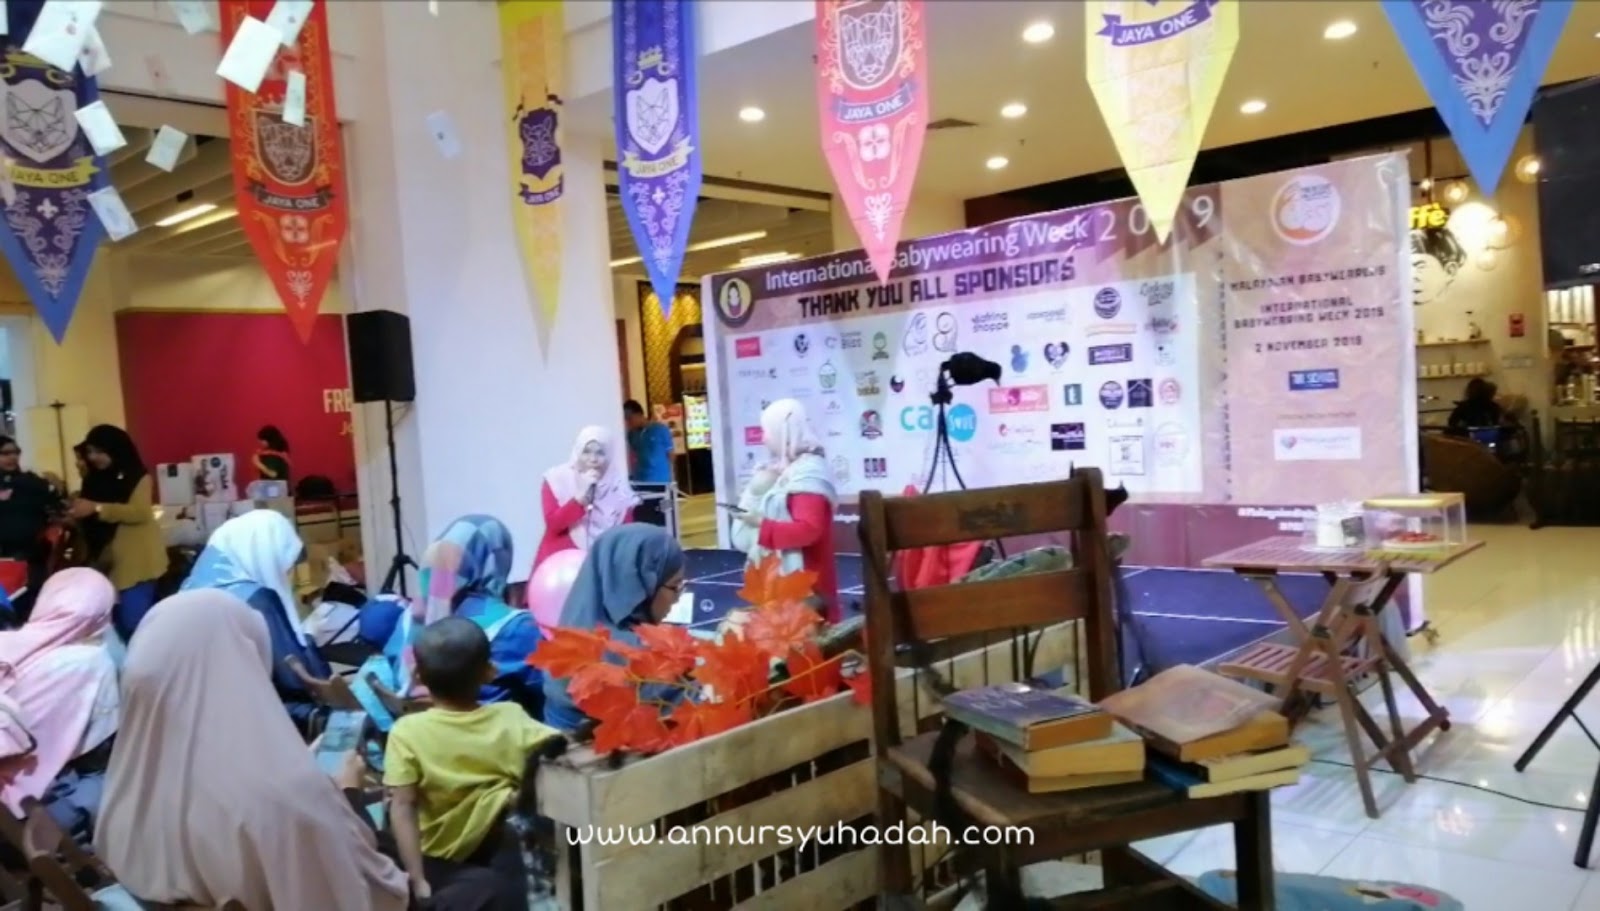 International Babywearing Week (IBW) is a week-long opportunity to celebrate, promote, advocate for, and focus media attention on the many benefits of babywearing, Babywearing Week 2019 di The School by Jaya One, Malaysian Babywearers (Persatuan Penggendong Bayi Malaysia)